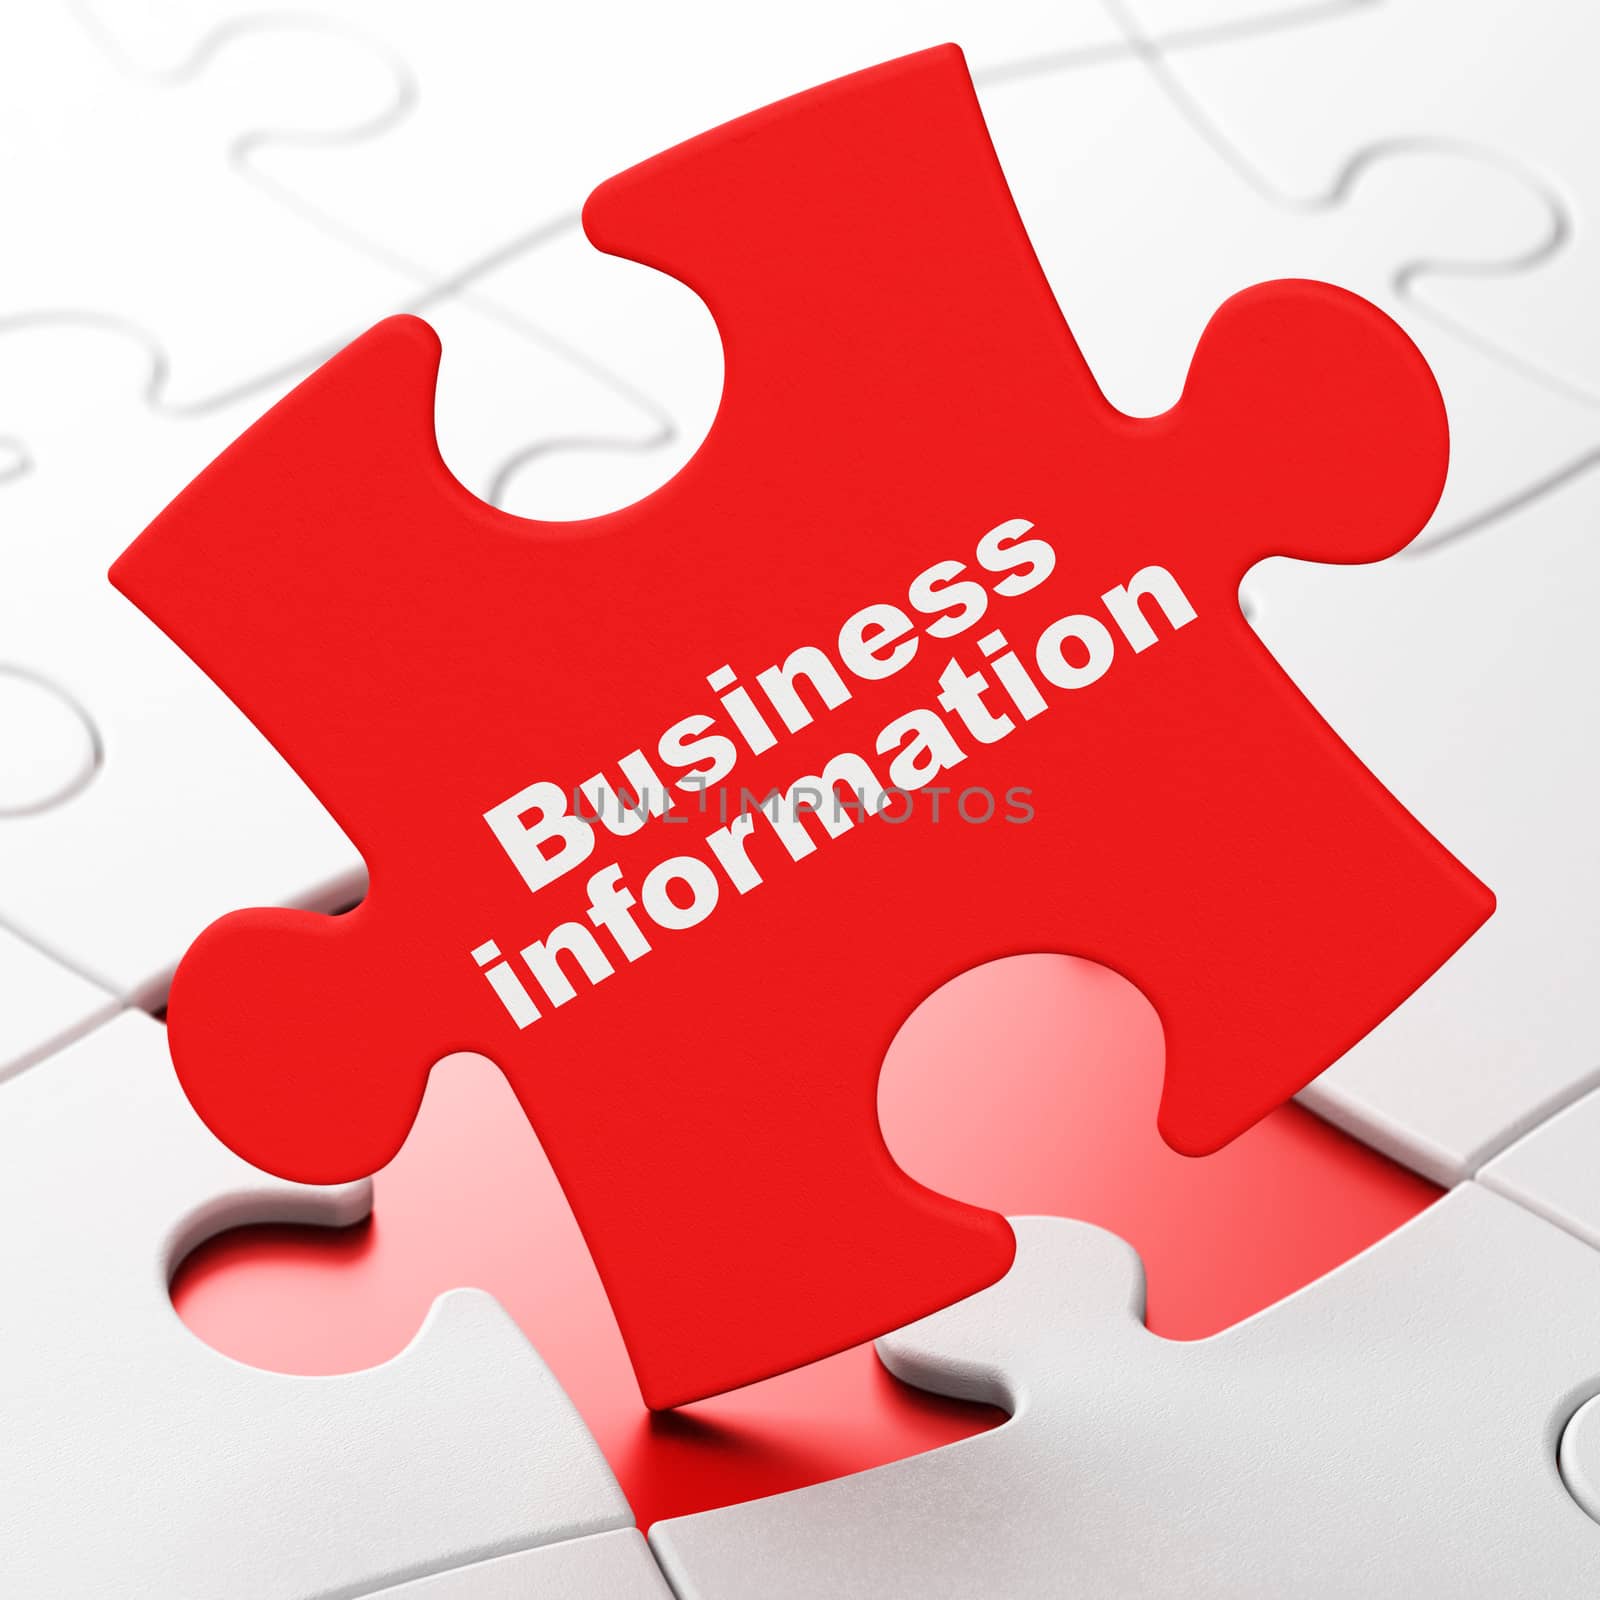 Finance concept: Business Information on Red puzzle pieces background, 3d render